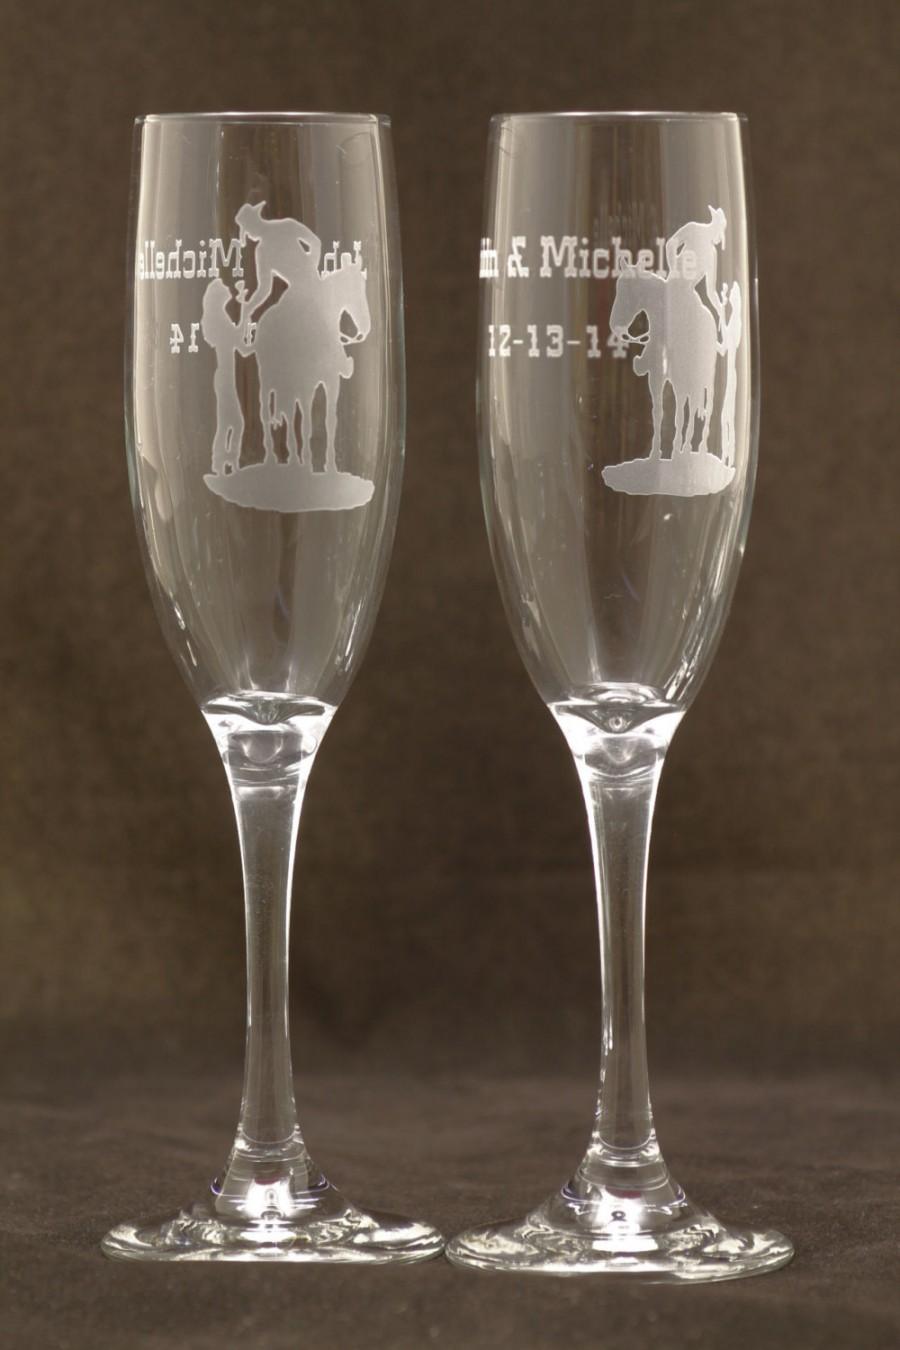 Western Cowboy Cowgirl Wedding Toasting Glasses Engraved Personalzied FREE 